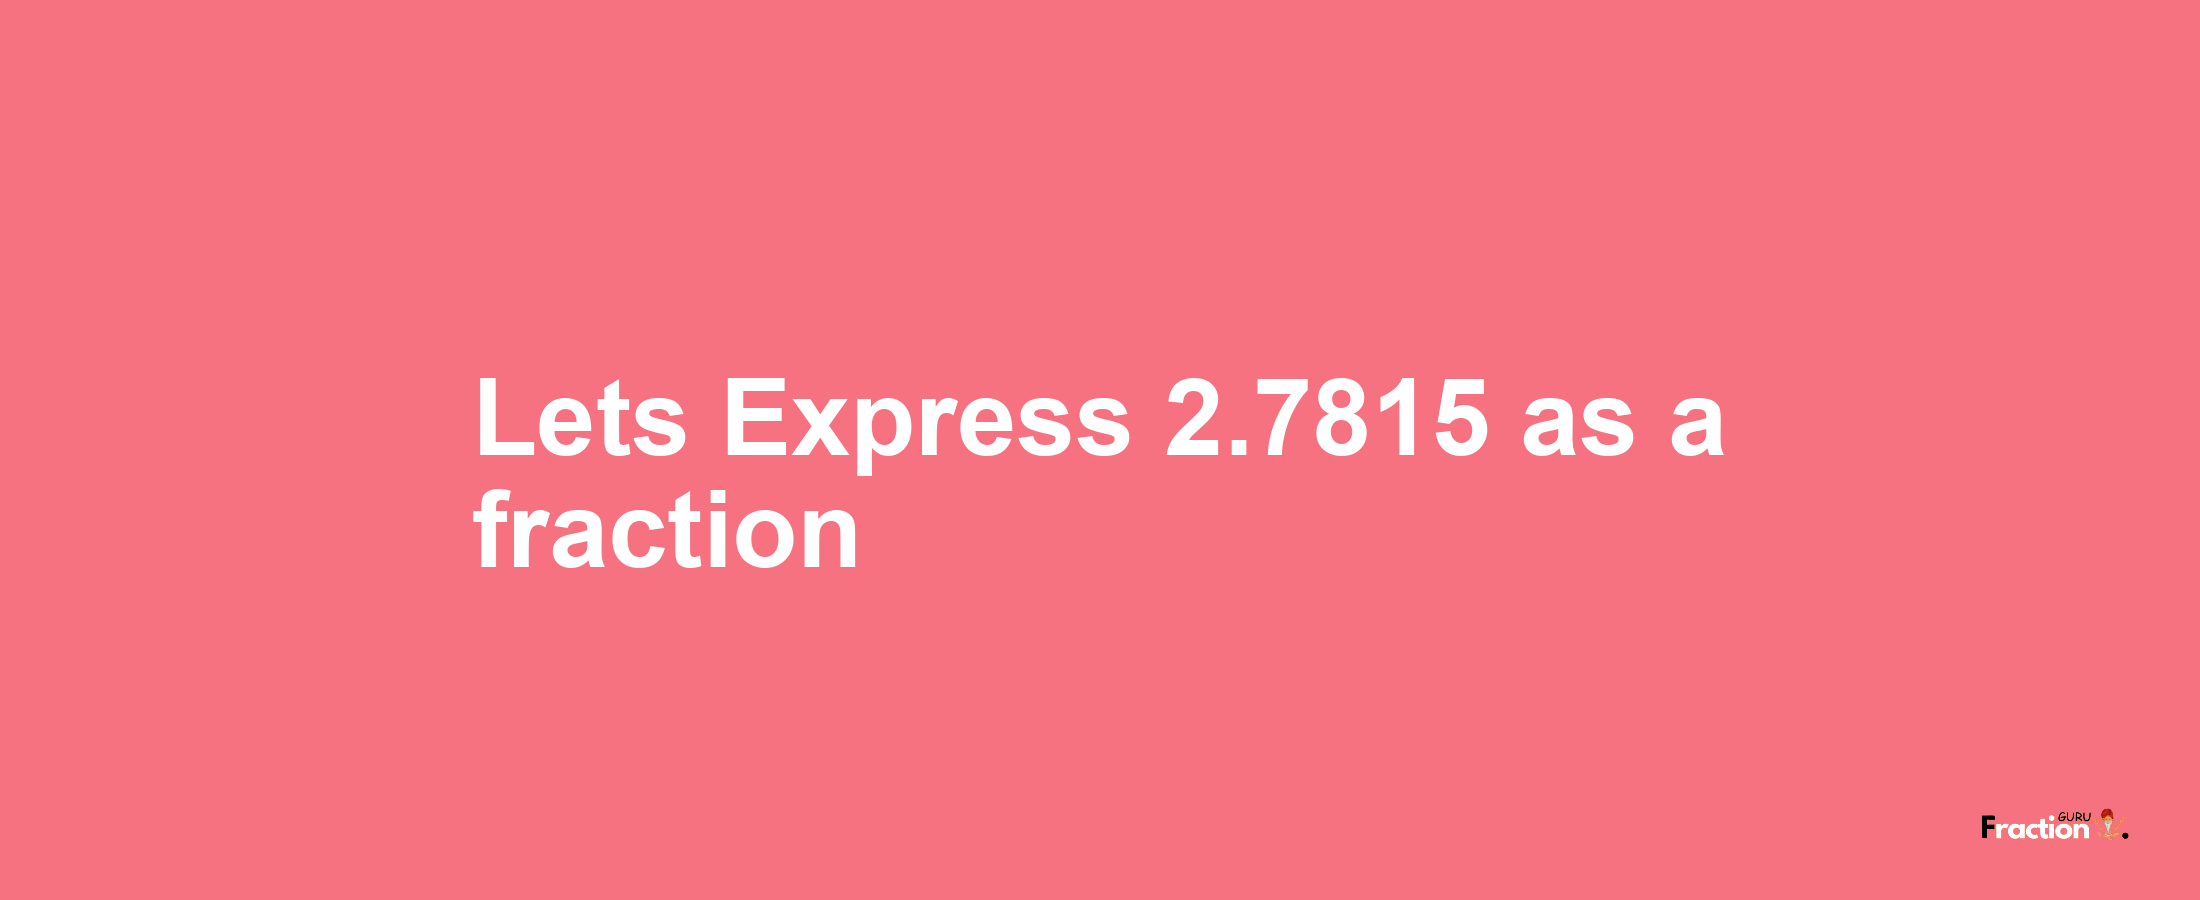 Lets Express 2.7815 as afraction